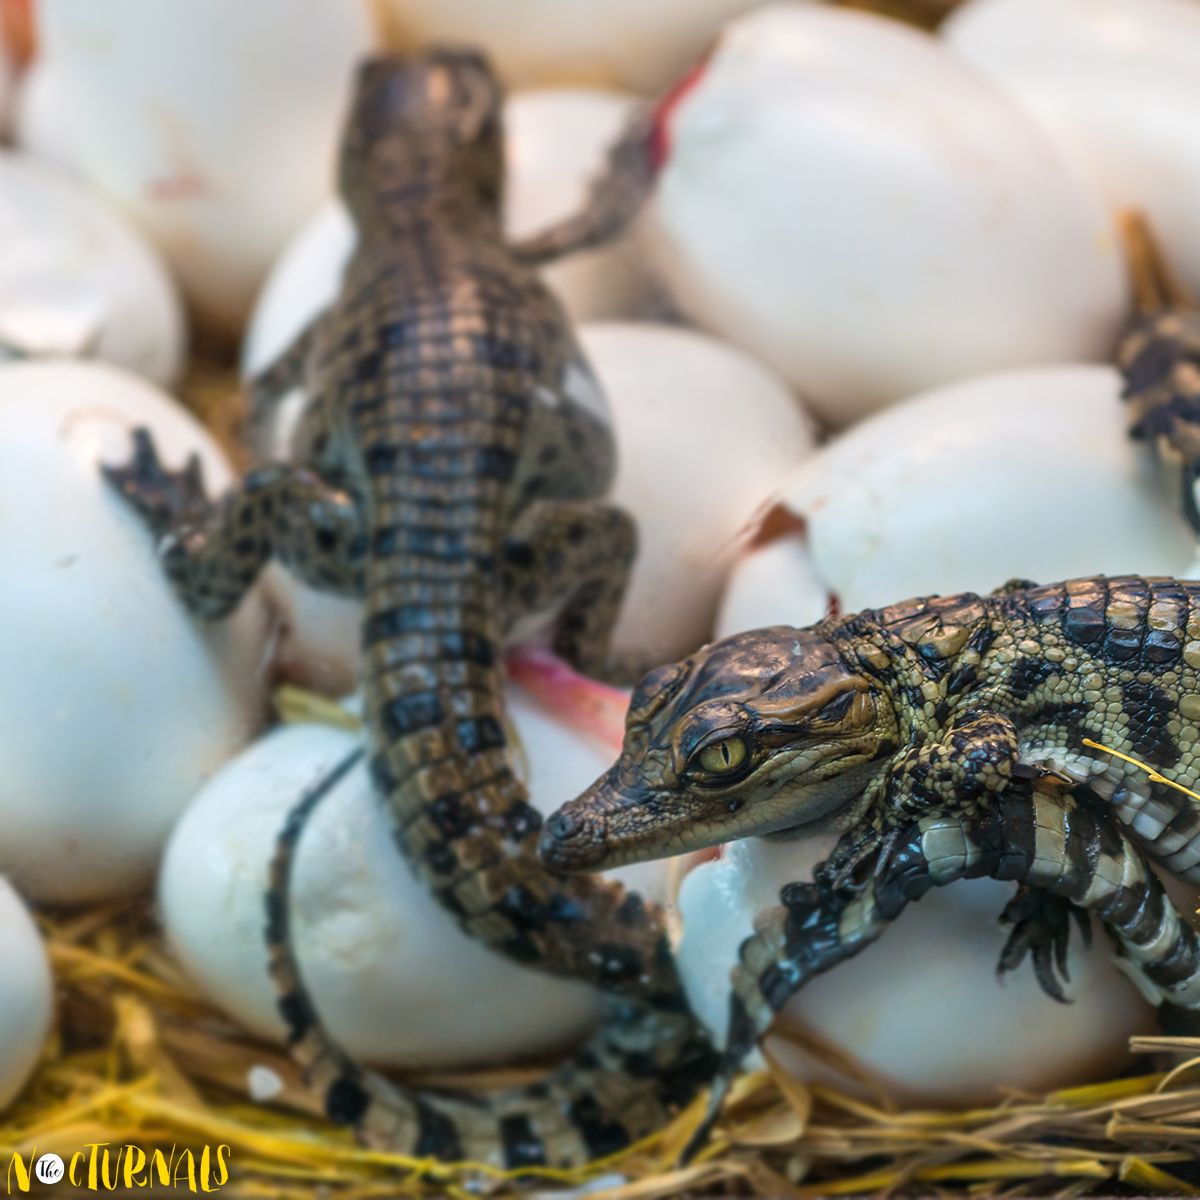 Two baby crocodiles are walking on top of a nest filled with crocodile eggs. 